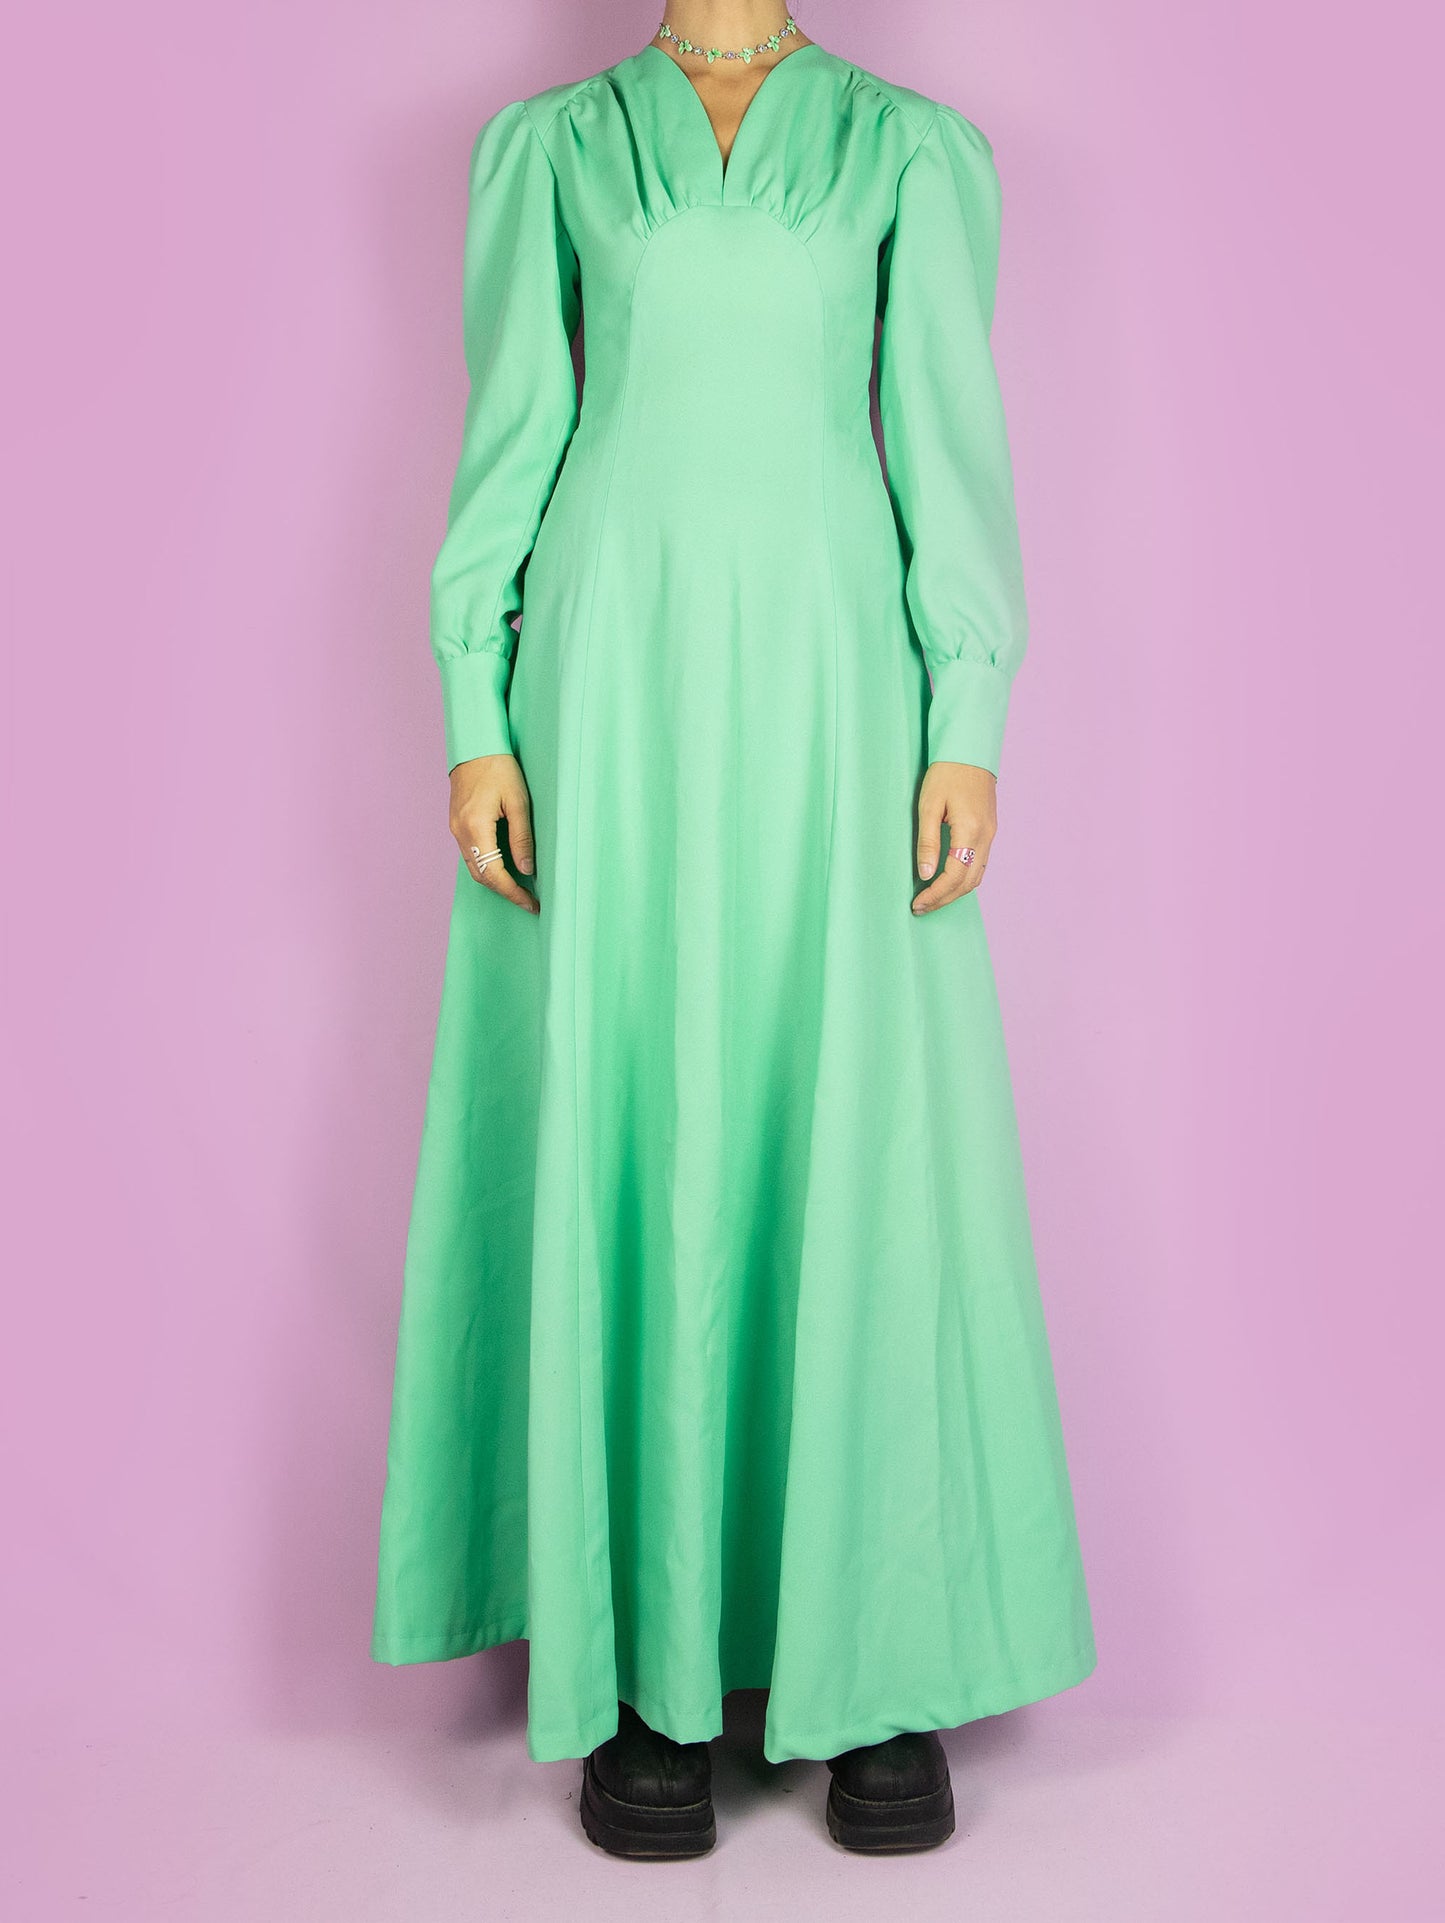 The Vintage 70s Balloon Sleeve Maxi Dress is a light turquoise dress with a gathered front and a zipper closure at the back. Cocktail party 1970s evening midi dress.